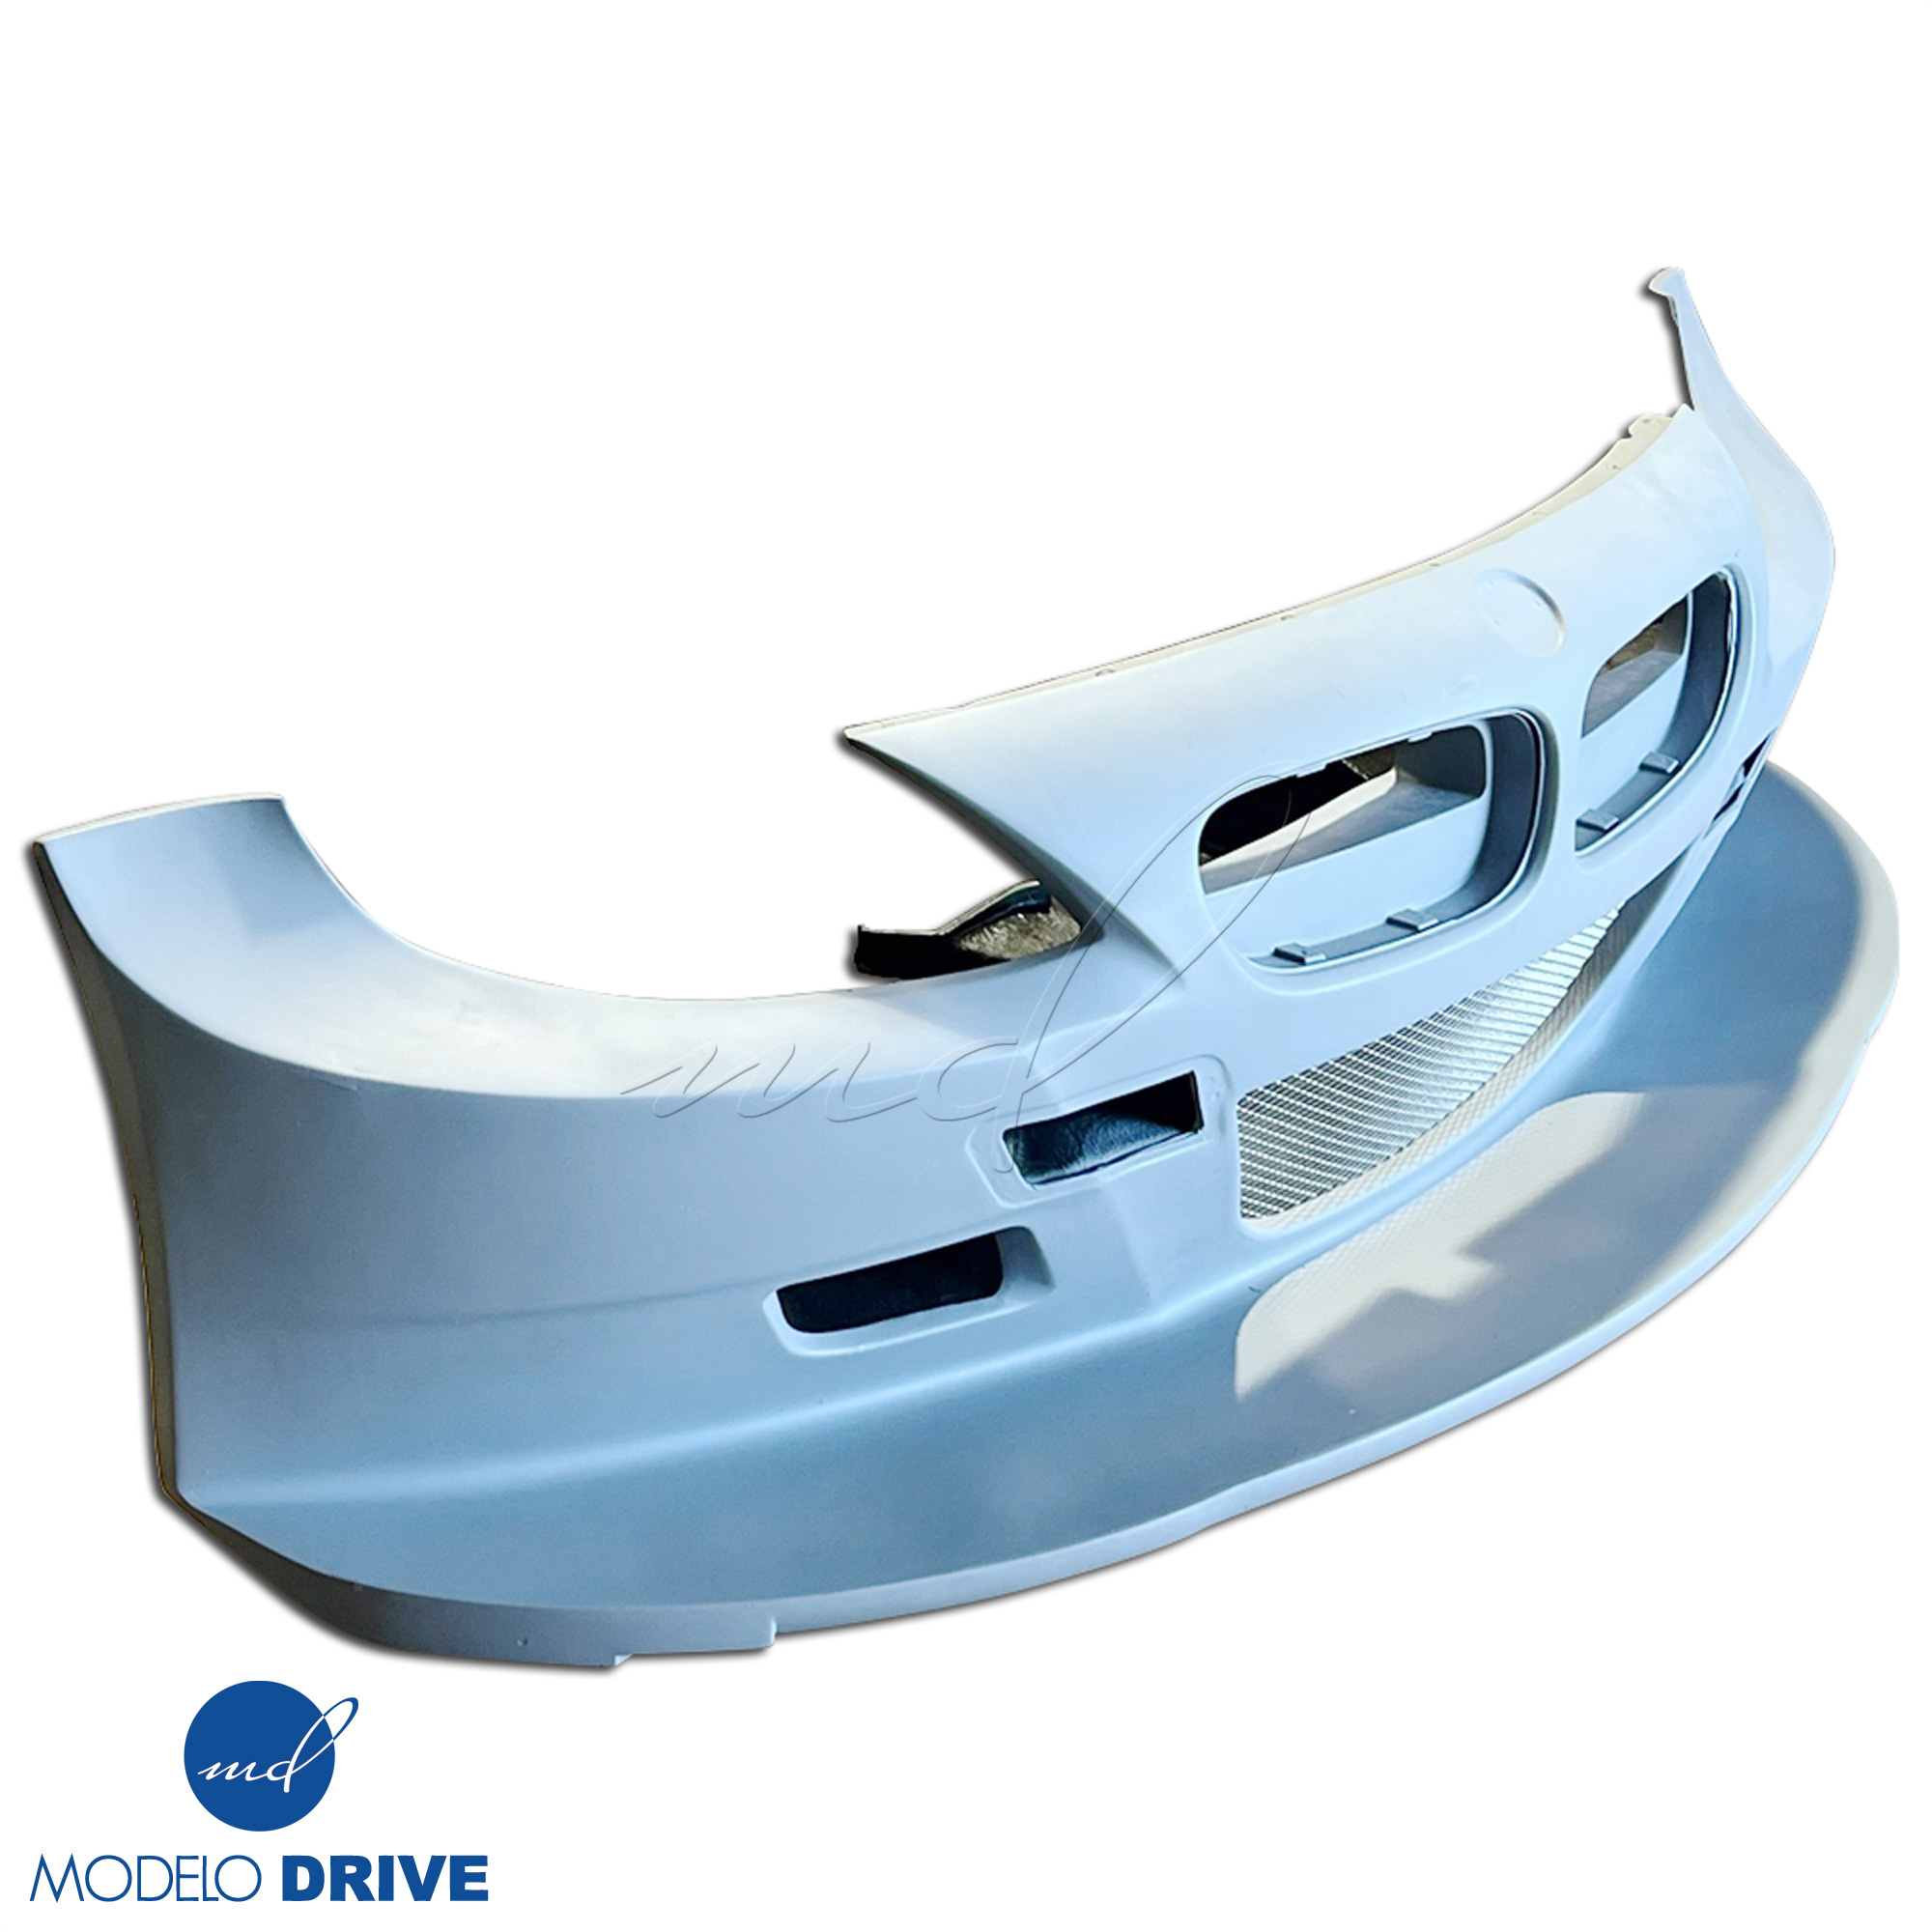 ModeloDrive FRP GTR Wide Body Front Bumper > BMW Z4 E86 2003-2008 > 3dr Coupe - Image 9